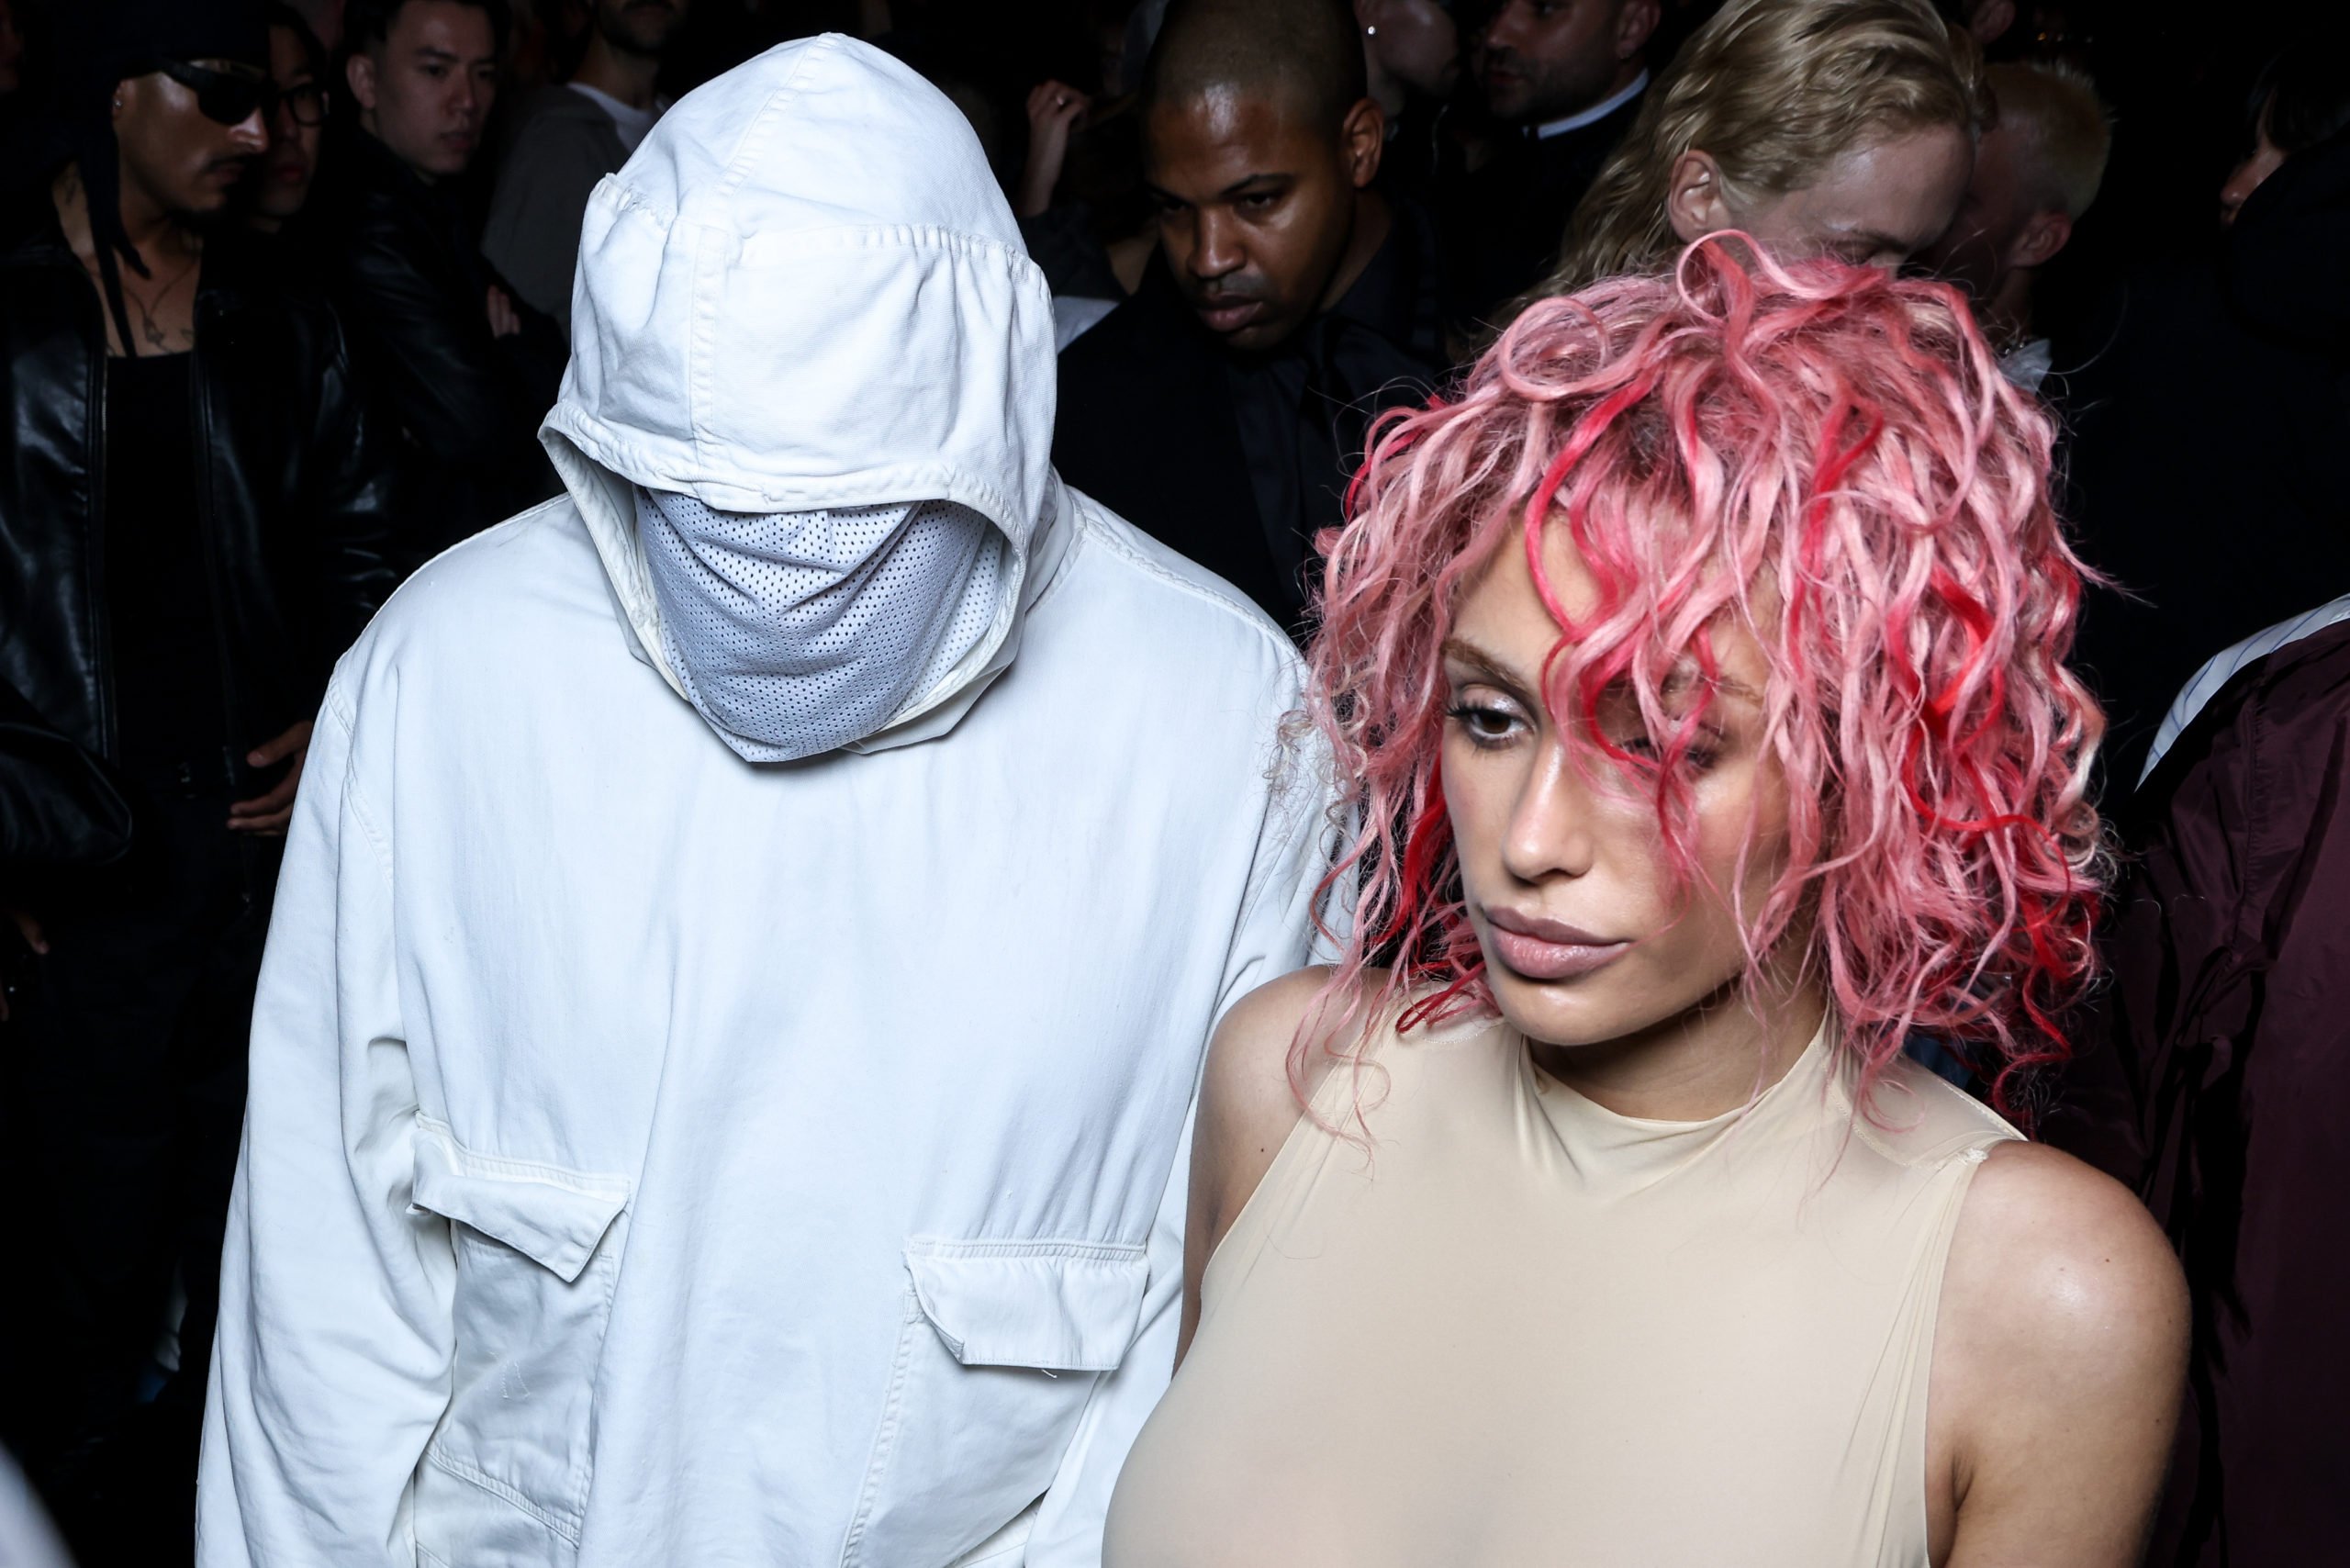 PARIS, FRANCE - JUNE 19: (EDITORIAL USE ONLY - For Non-Editorial use please seek approval from Fashion House) (L-R) Kanye West and Bianca Censori attend the Prototypes Menswear Spring/Summer 2025 show as part of Paris Fashion Week on June 19, 2024 in Paris, France. (Photo by Lyvans Boolaky/Getty Images)